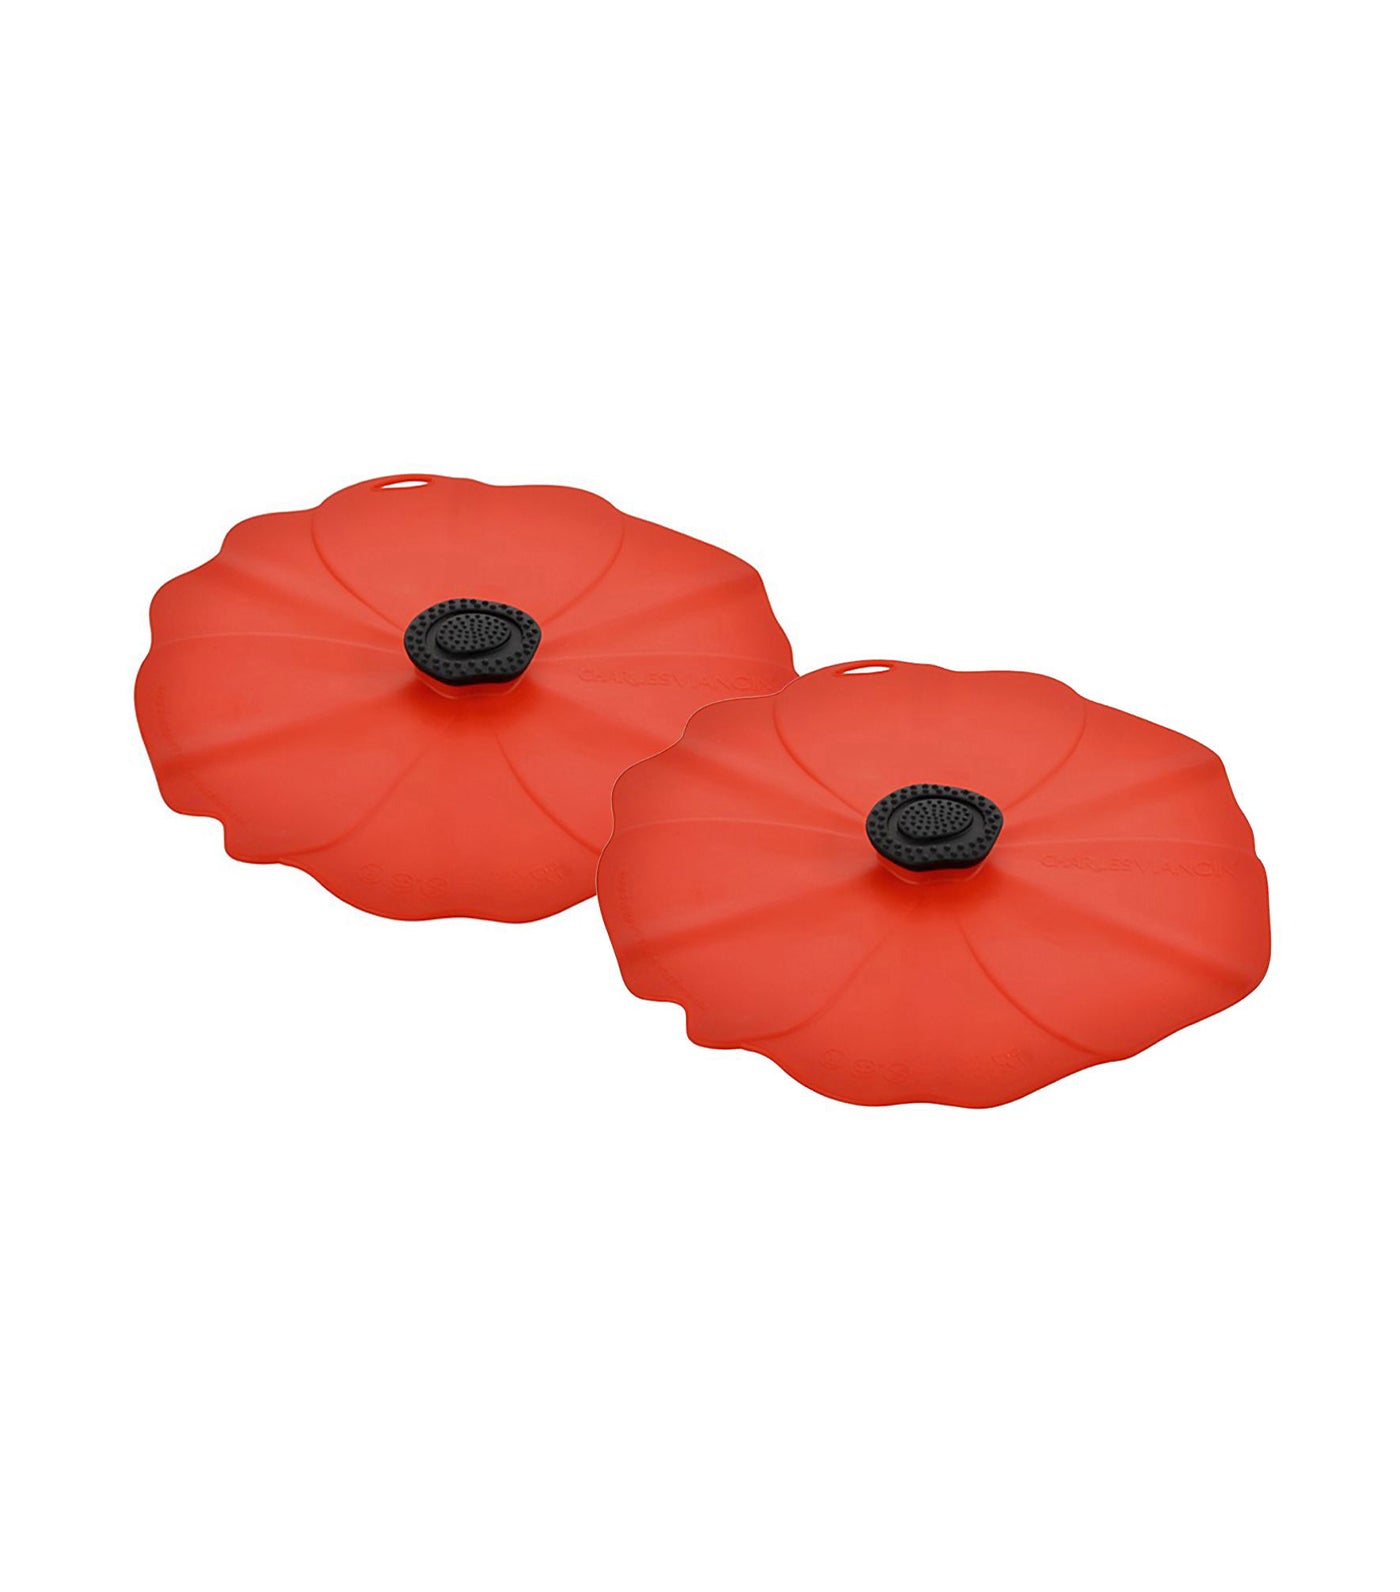 charles viancin poppy - drink covers